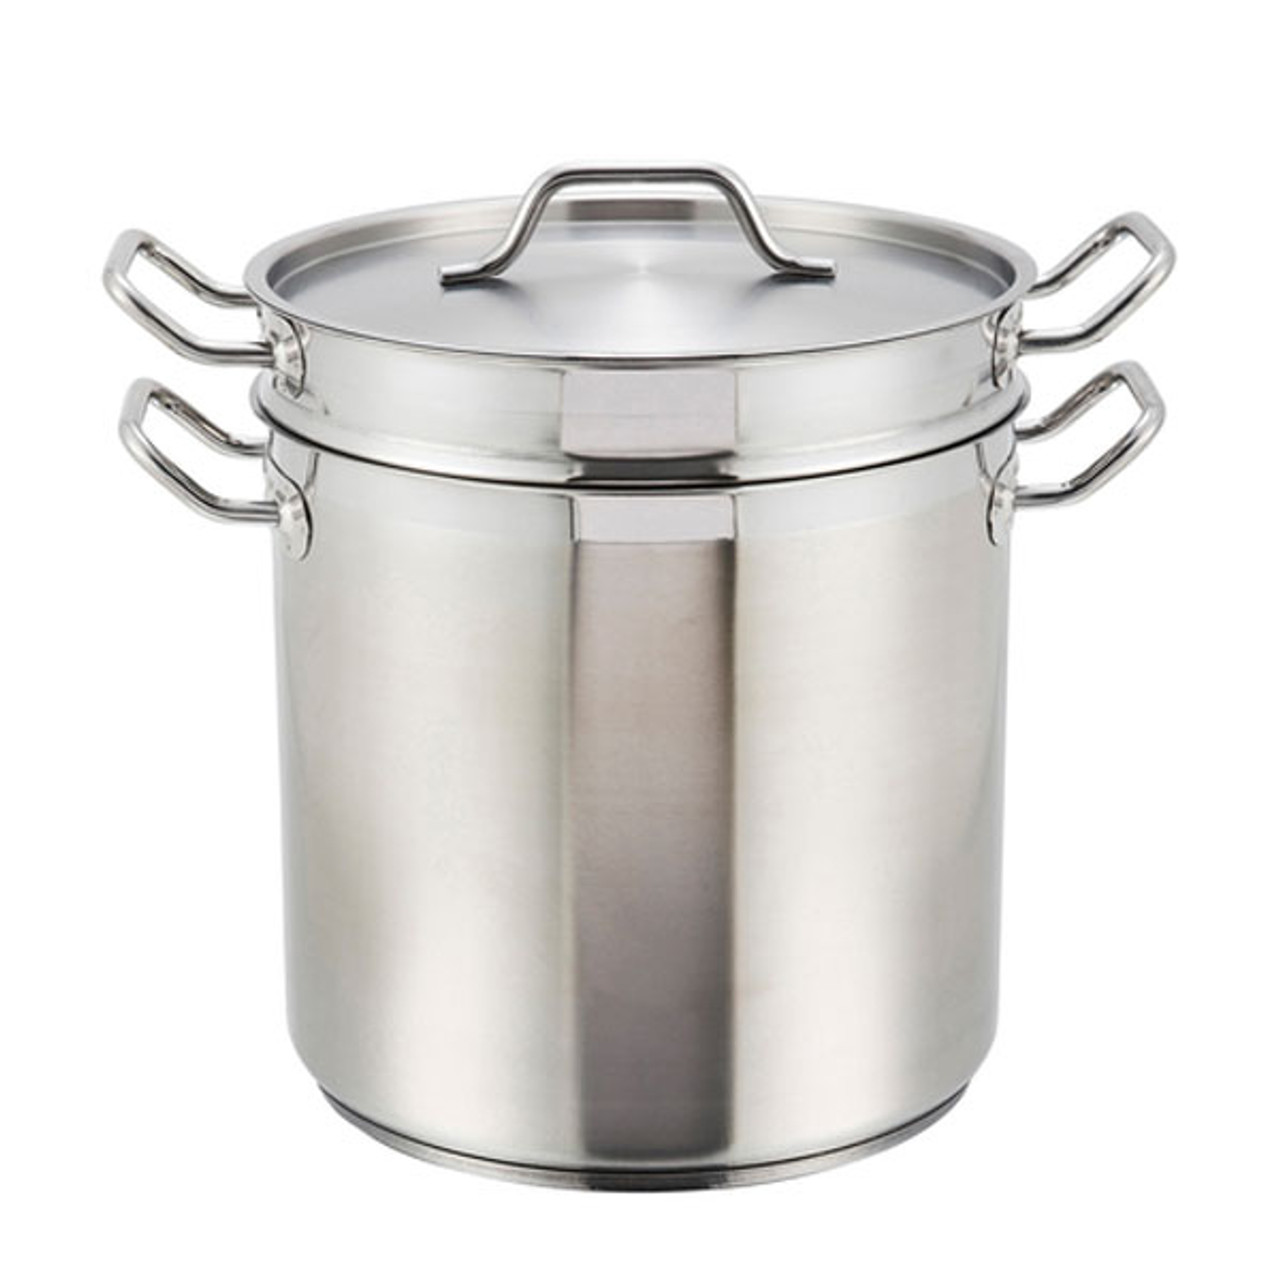 https://cdn11.bigcommerce.com/s-g3i86bef61/images/stencil/1280x1280/products/4206/4765/Winco-SSDB-20-Double-Boiler__74058.1683049875.jpg?c=1